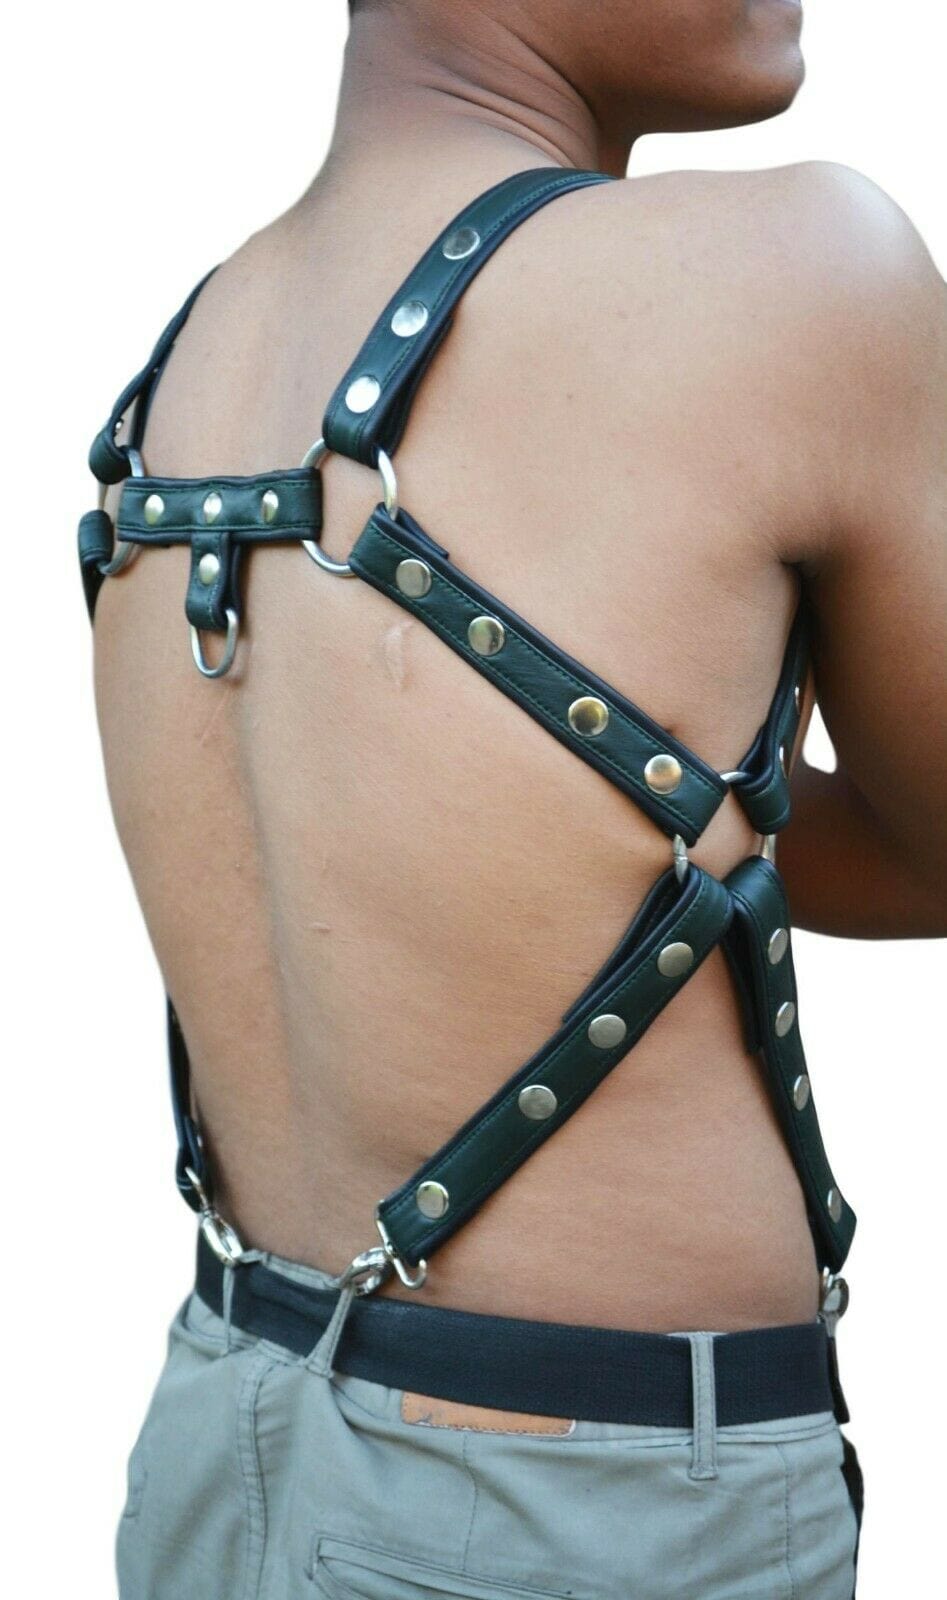 Modular Chest Harness faux leather